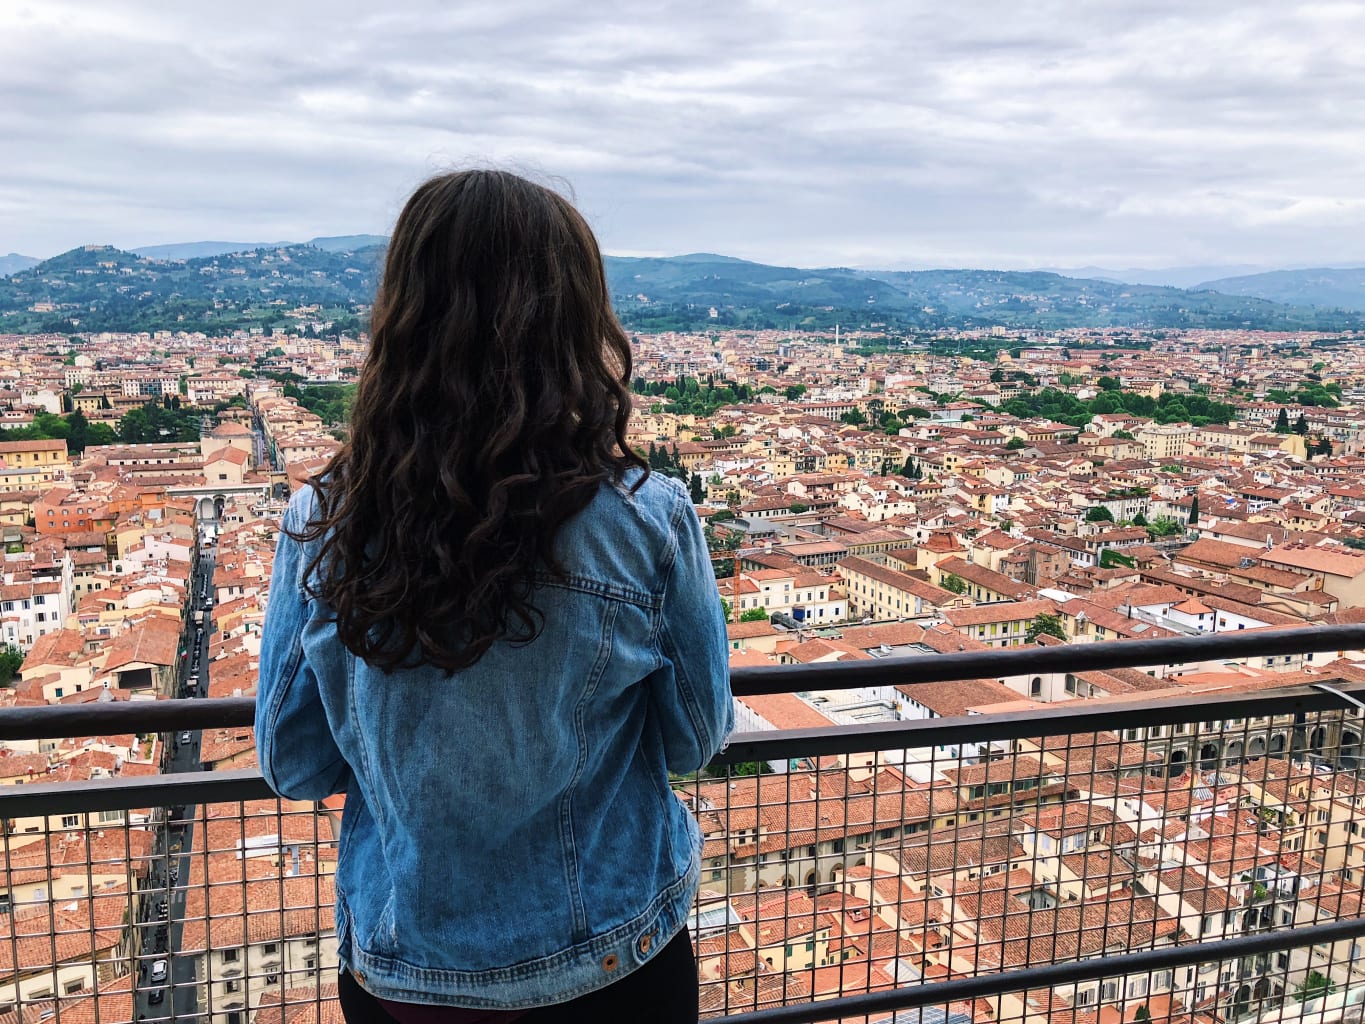 A student overlooking a view of Florence, Italy.